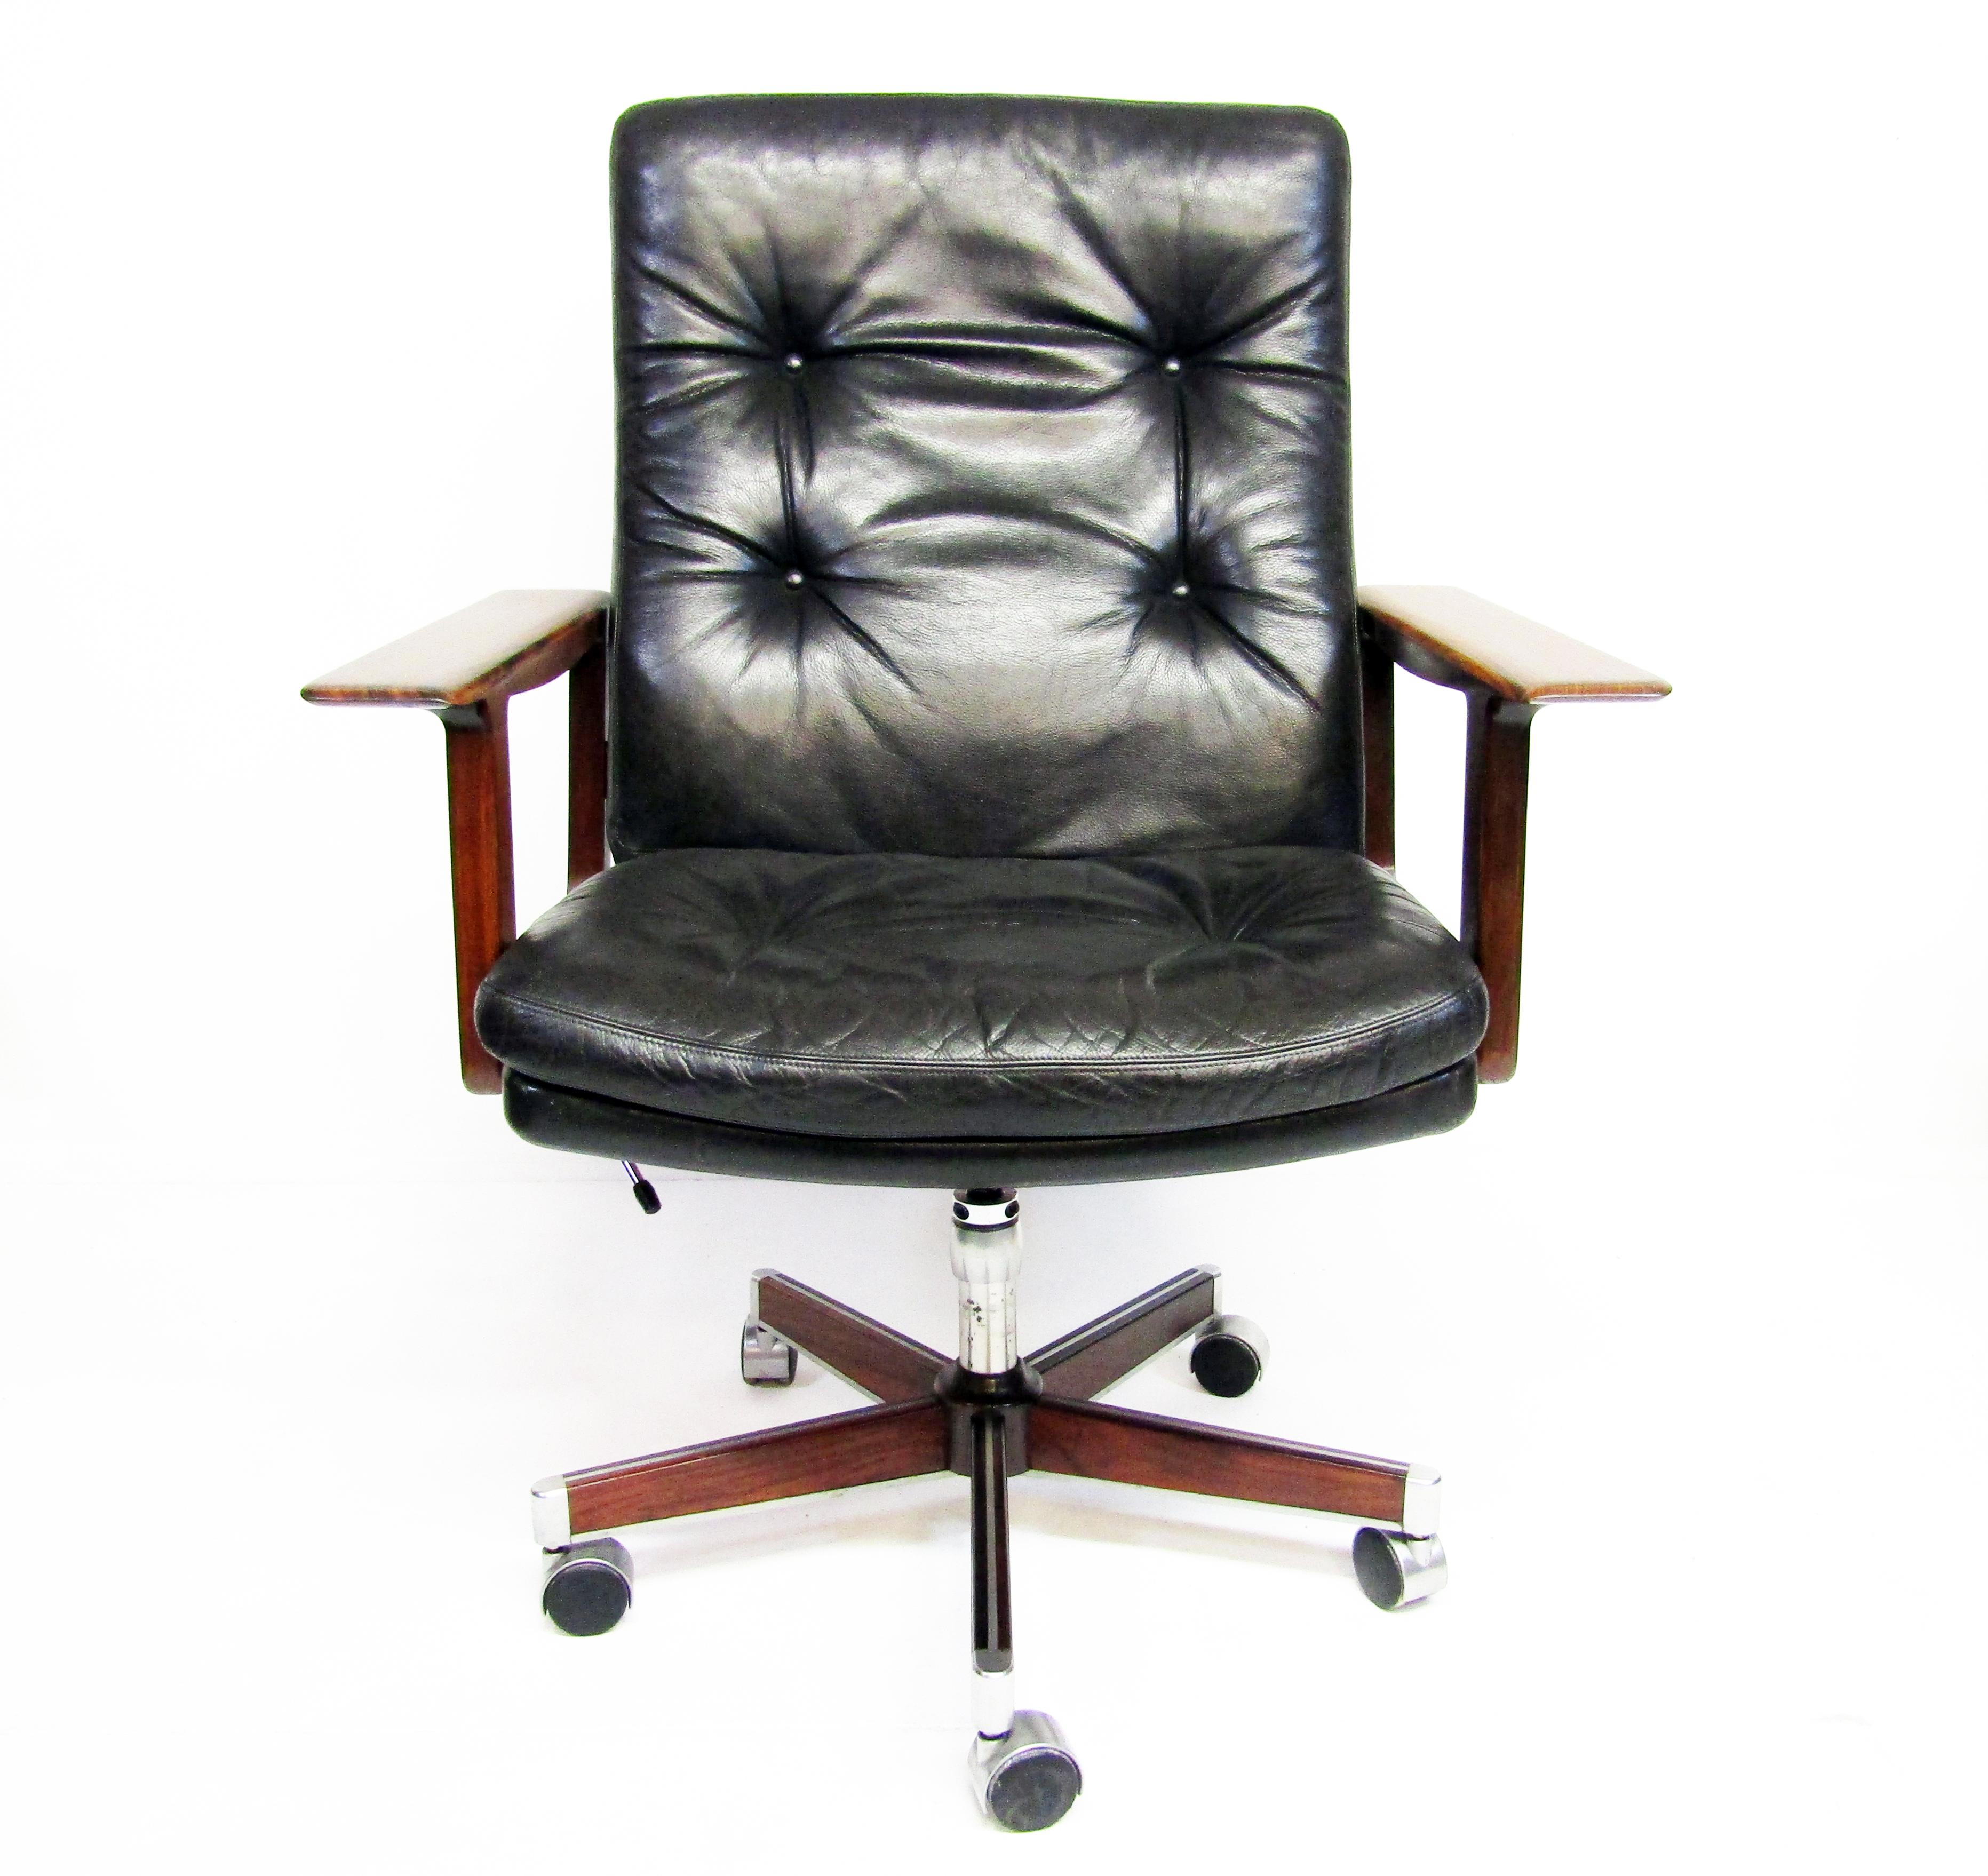 Scandinavian Modern Danish Executive Office Chair in Leather & Rosewood by Arne Vodder for Sibast